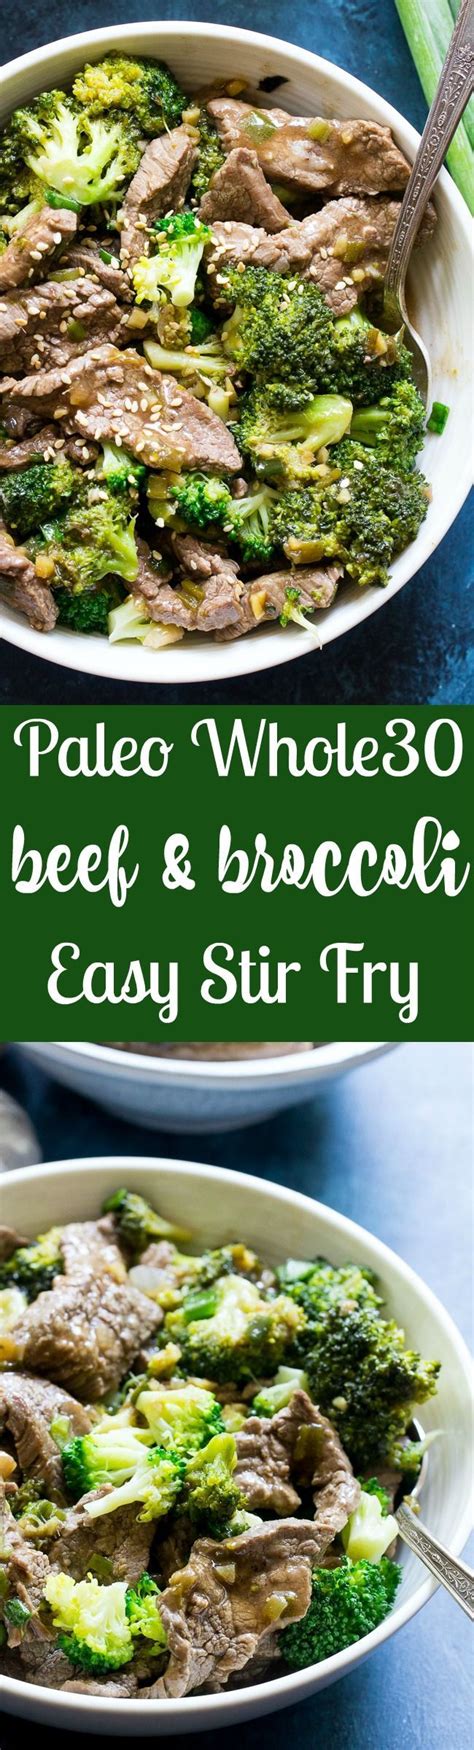 This Paleo And Whole30 Beef And Broccoli Stir Fry Is Perfect For